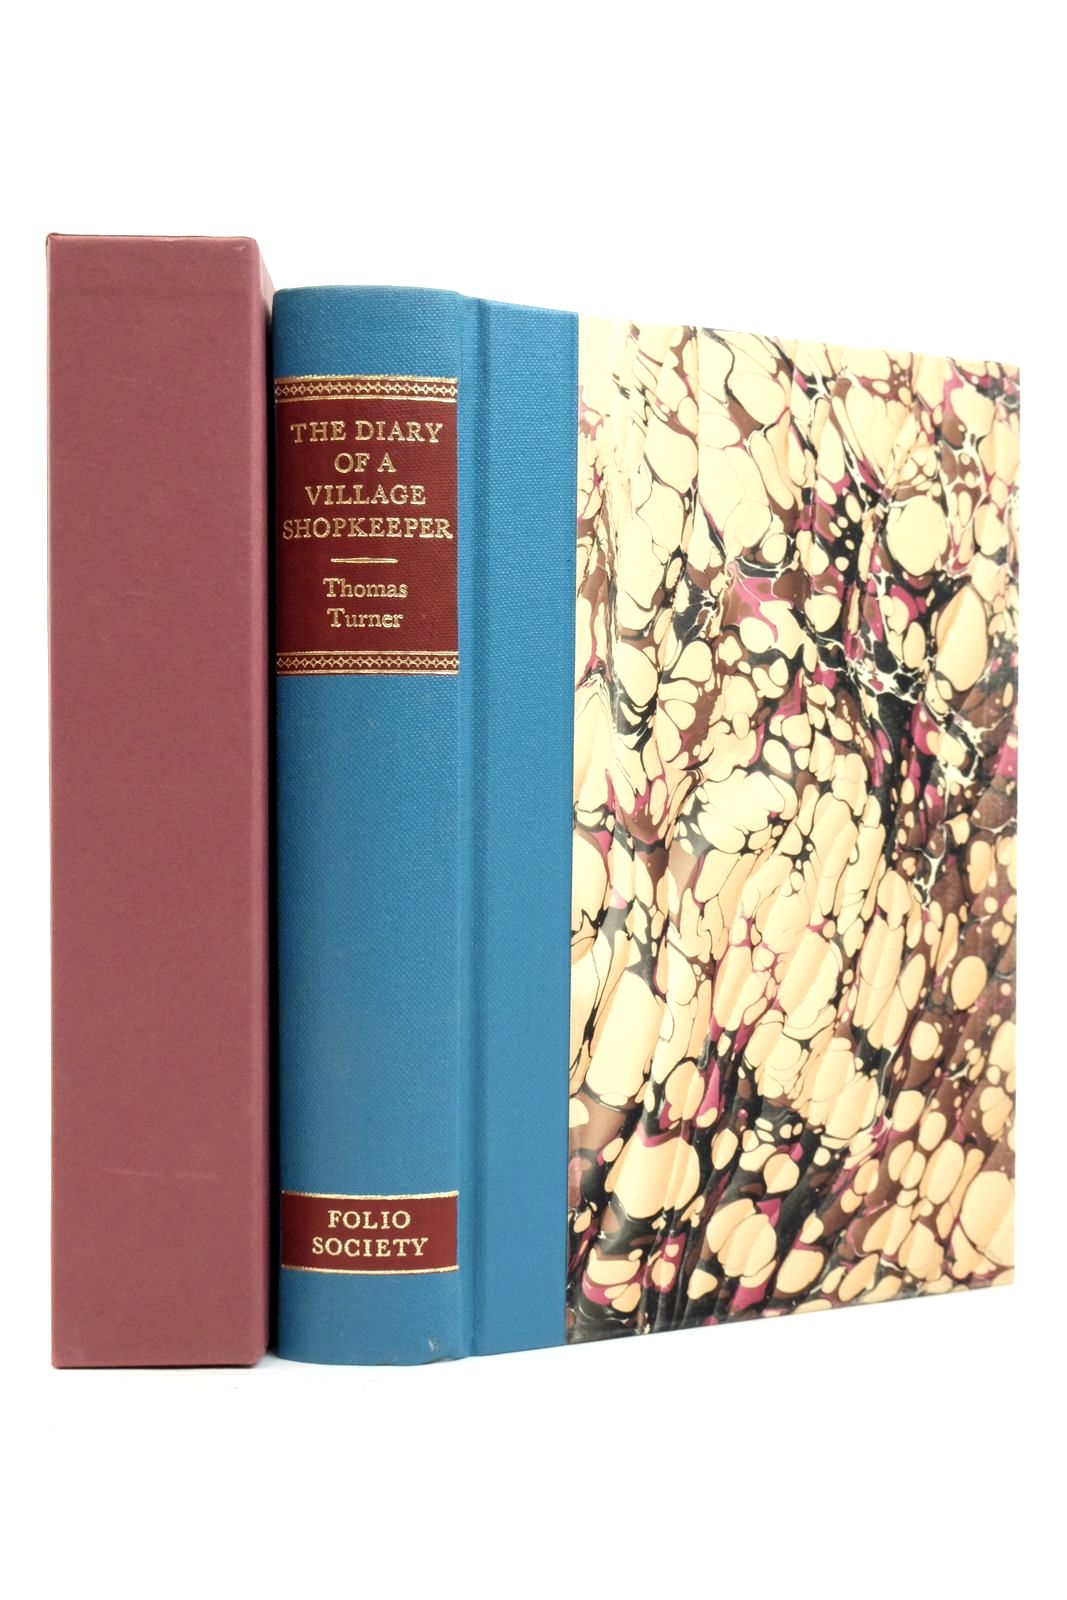 Photo of THE DIARY OF A VILLAGE SHOPKEEPER 1754-1765 written by Turner, Thomas Vaisey, David illustrated by Macgregor, Miriam published by Folio Society (STOCK CODE: 2137882)  for sale by Stella & Rose's Books